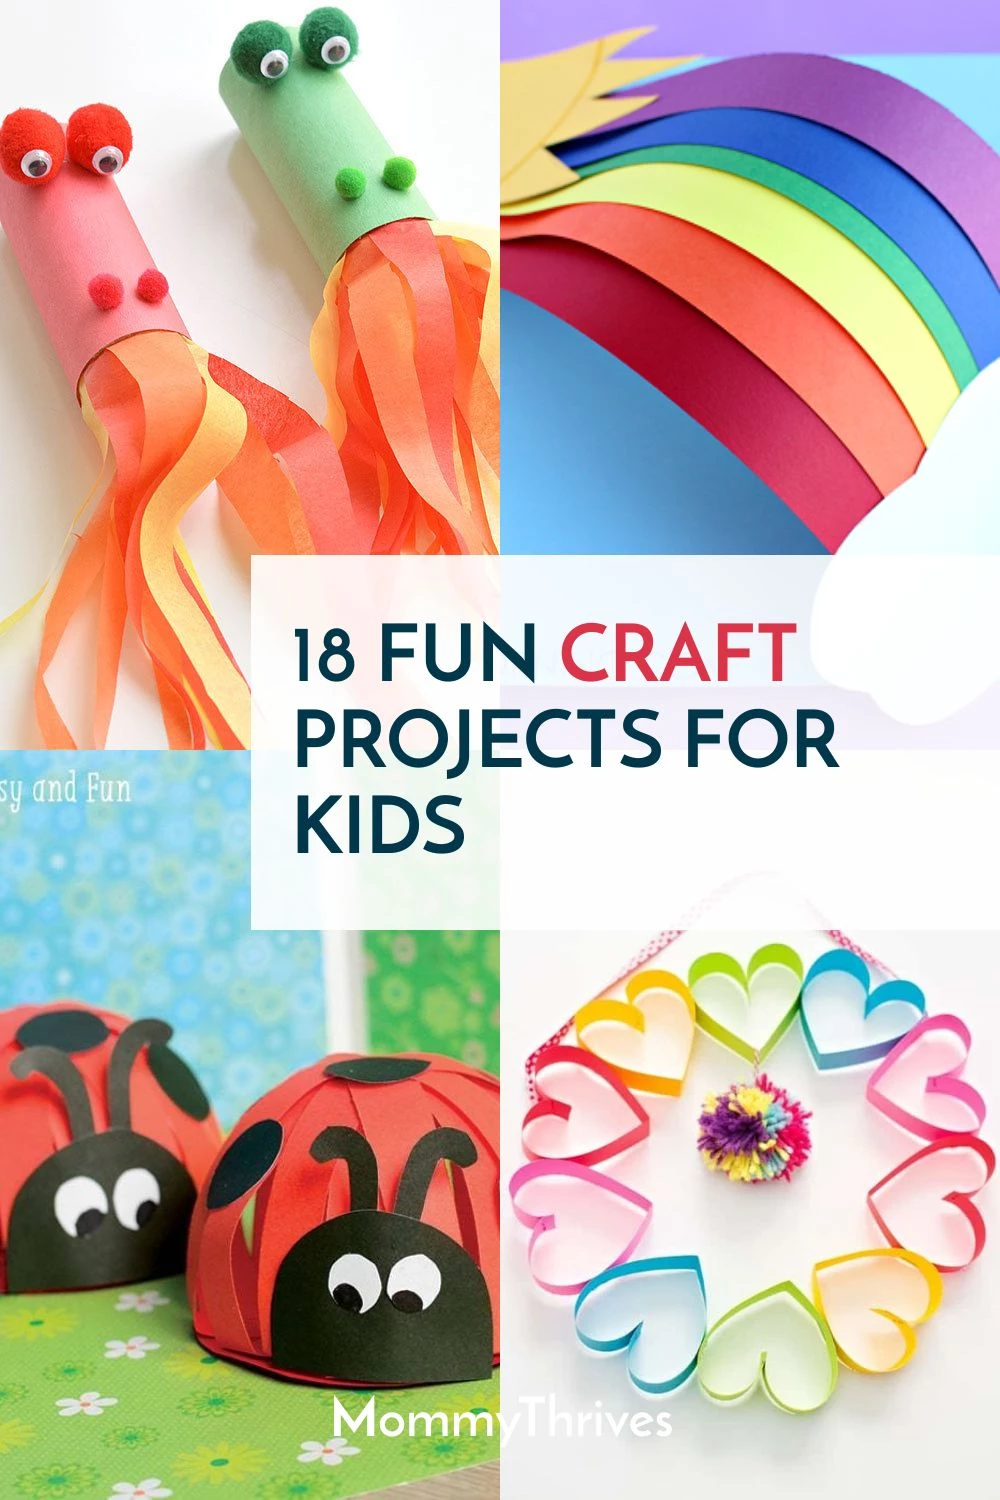 Creative Craft Ideas for Kids  Fun and Easy Art & Craft Ideas for Kids 